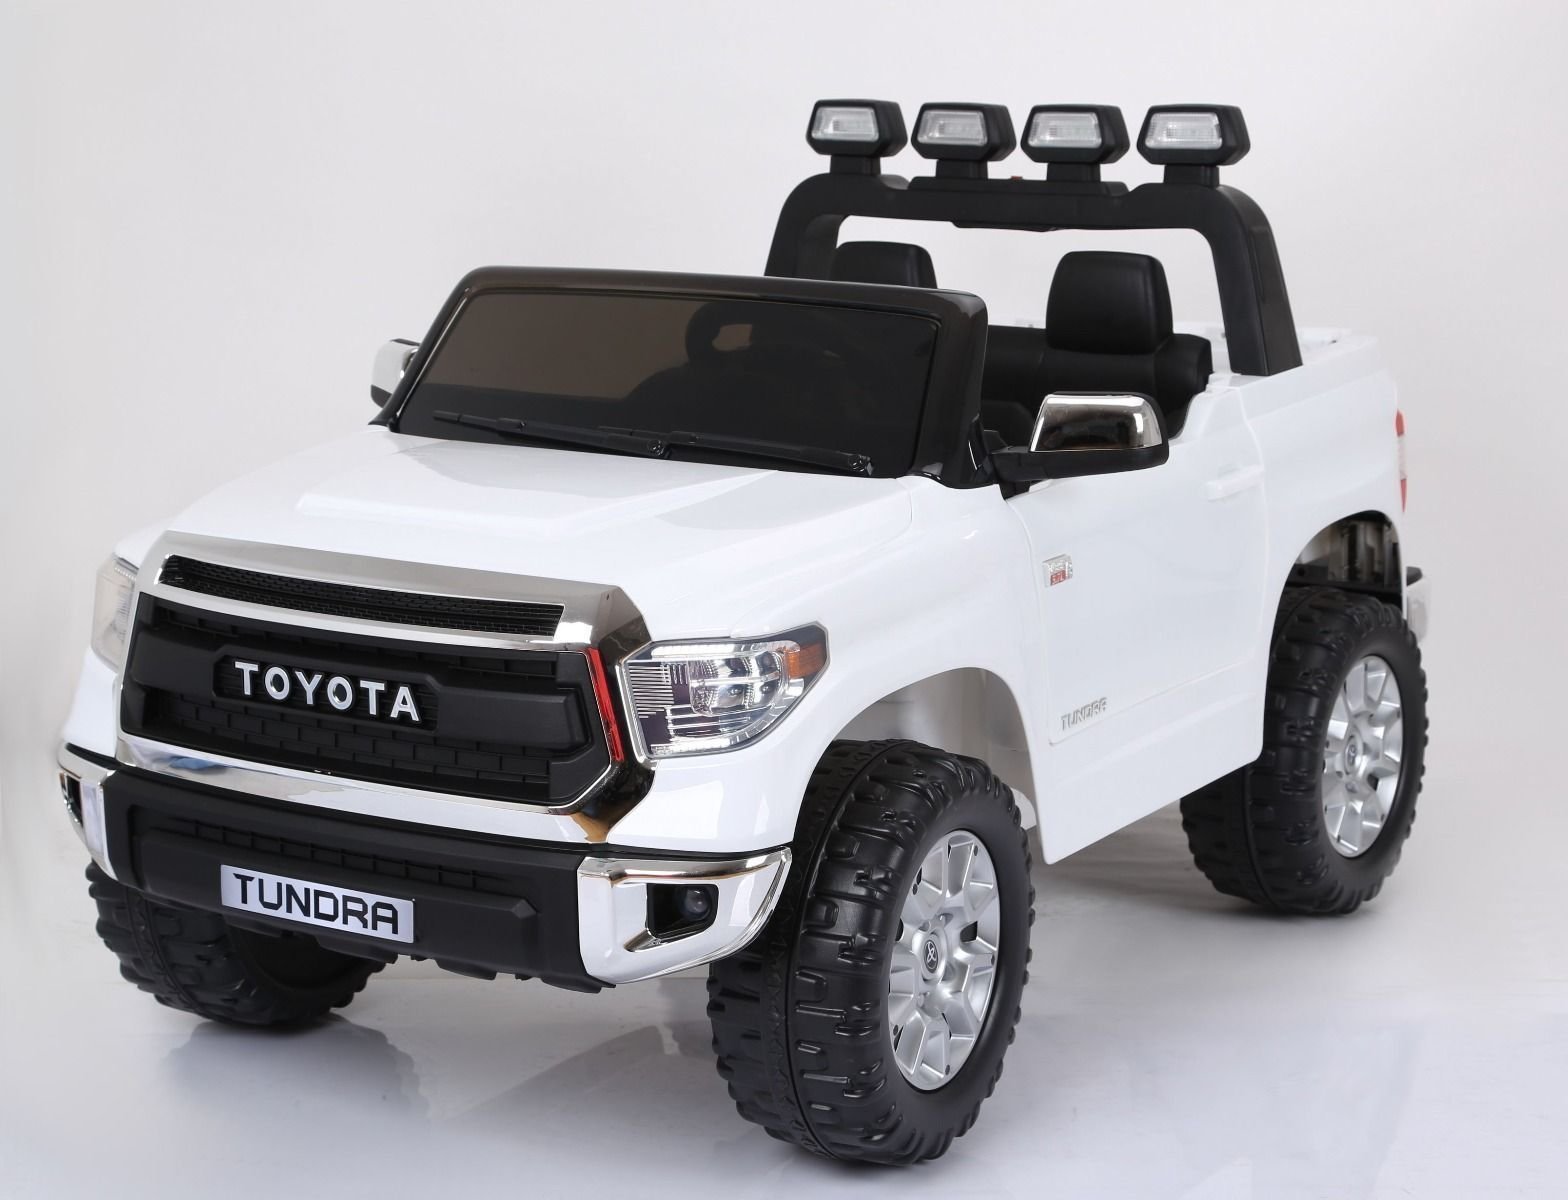 Electric Toy Car Beneo Toyota Tundra White Electric Toy Car